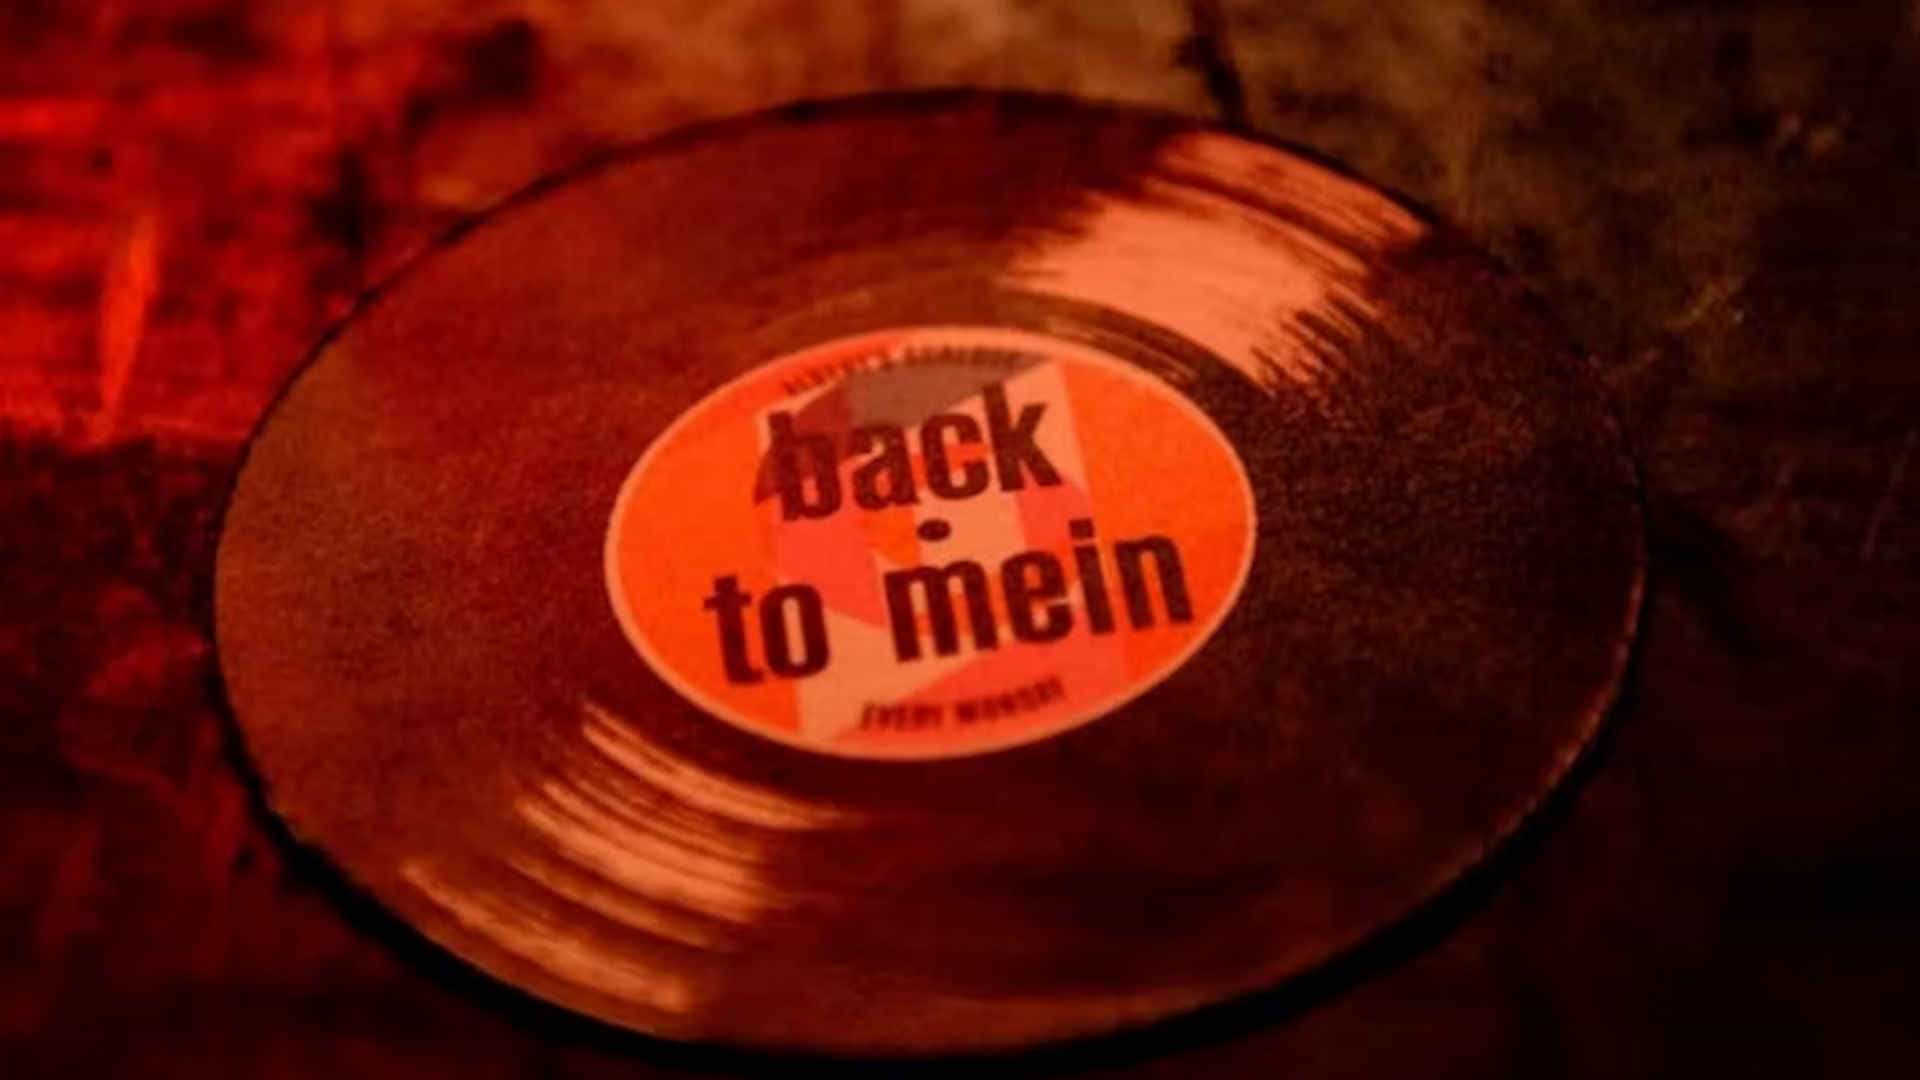 Back To Mein